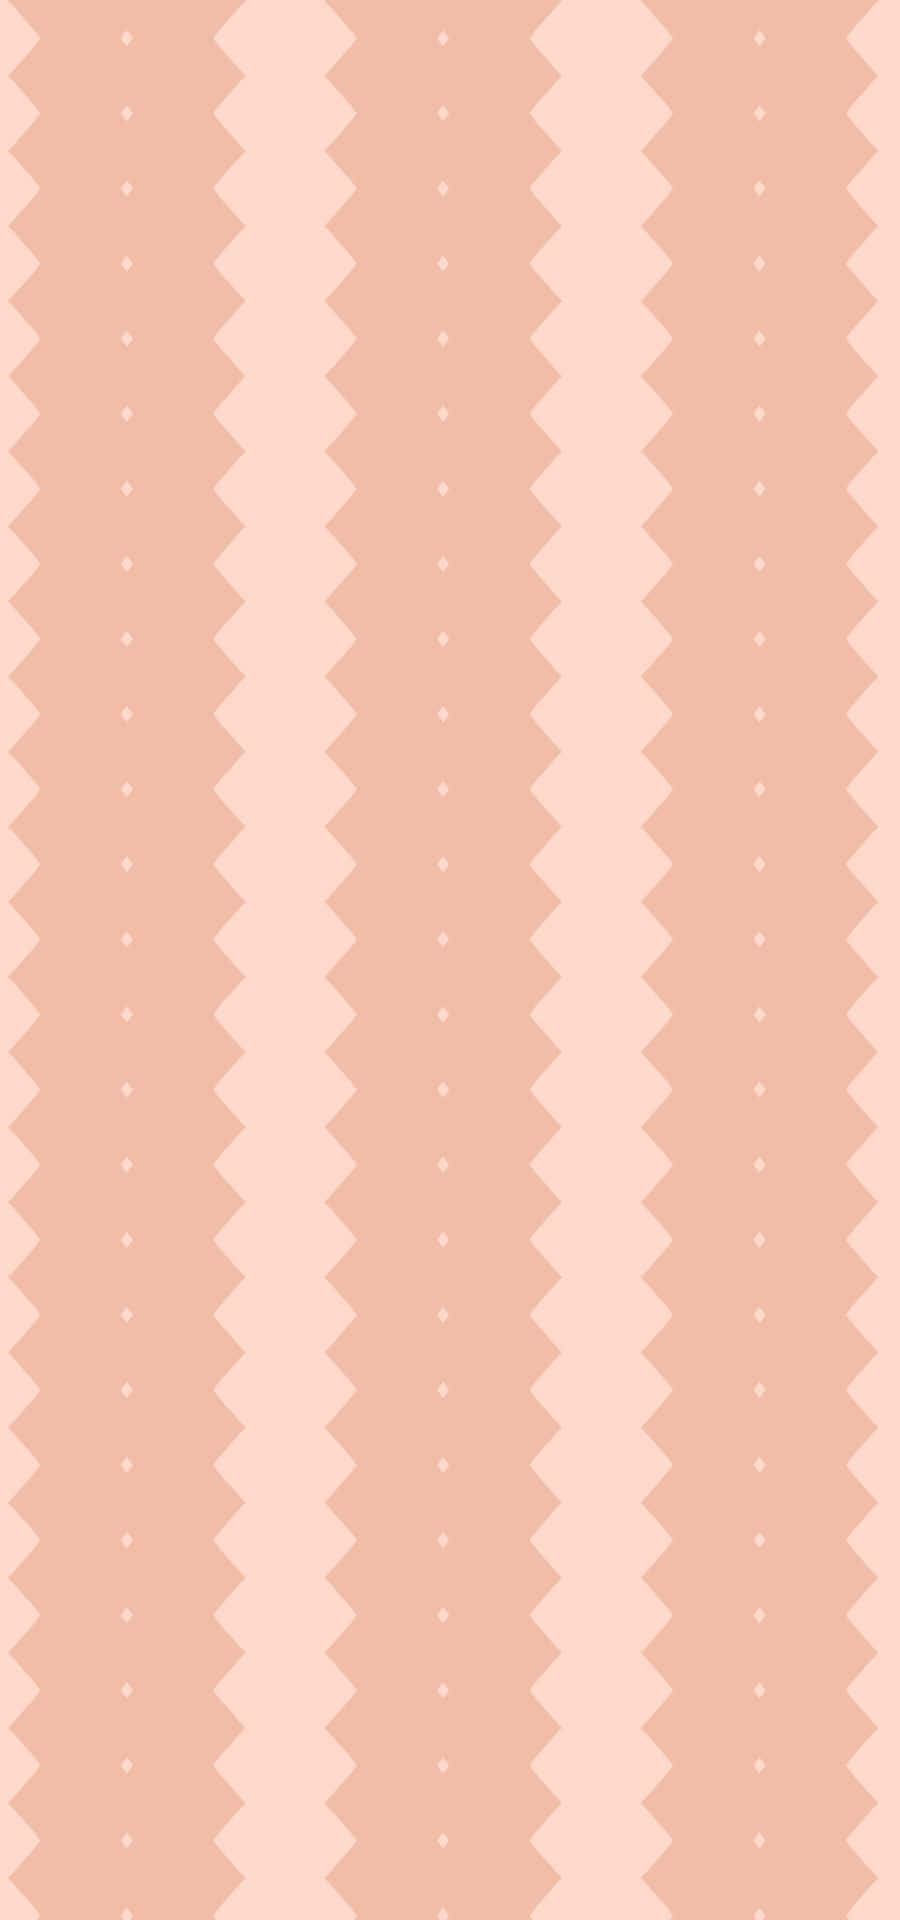 A Pink And White Striped Pattern